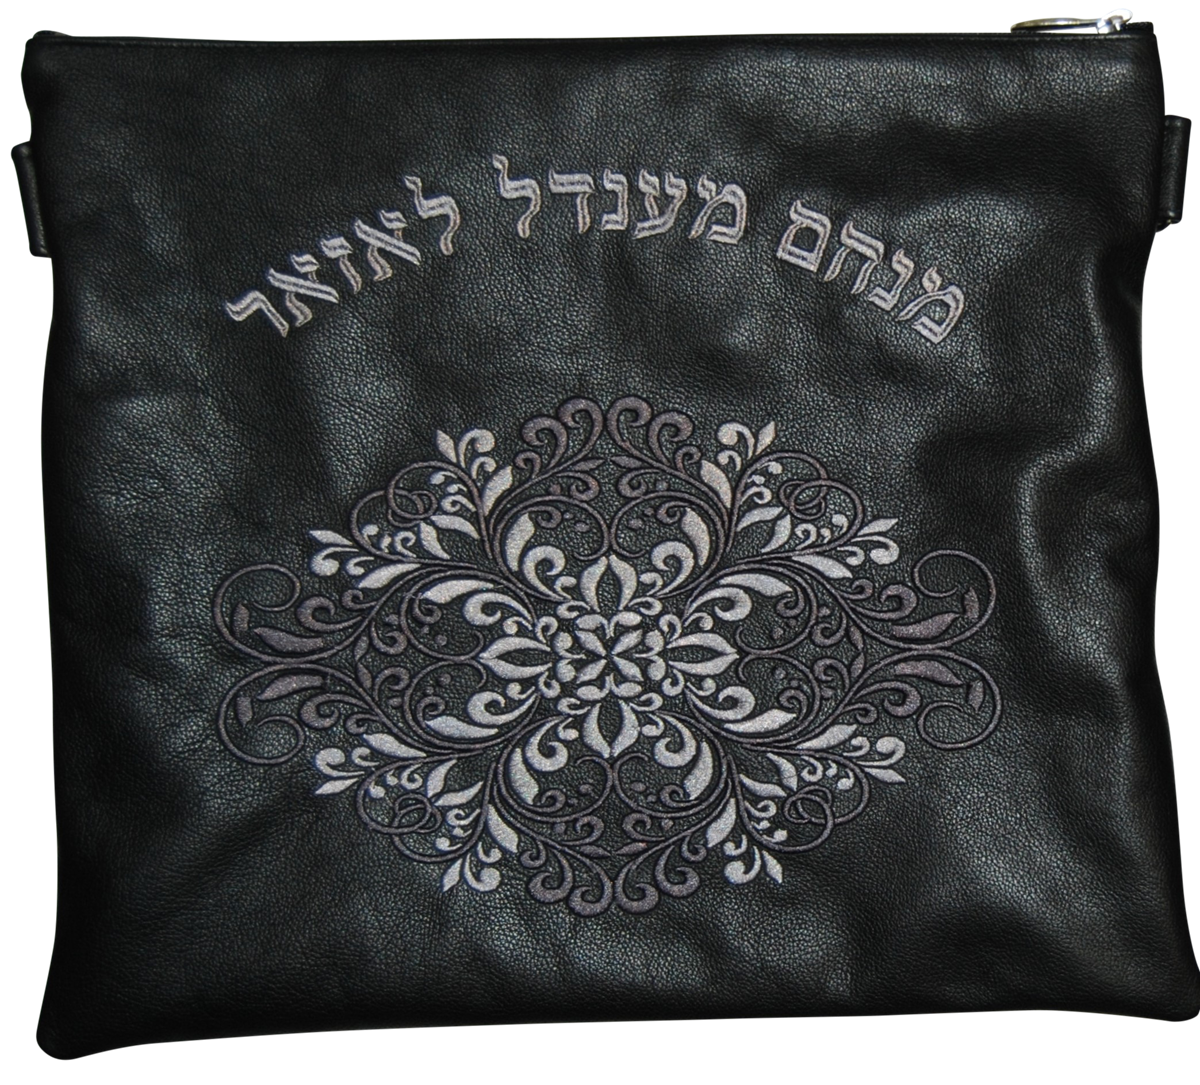 Charcoal leather Tallis Tefillin bag with floral swirl center design